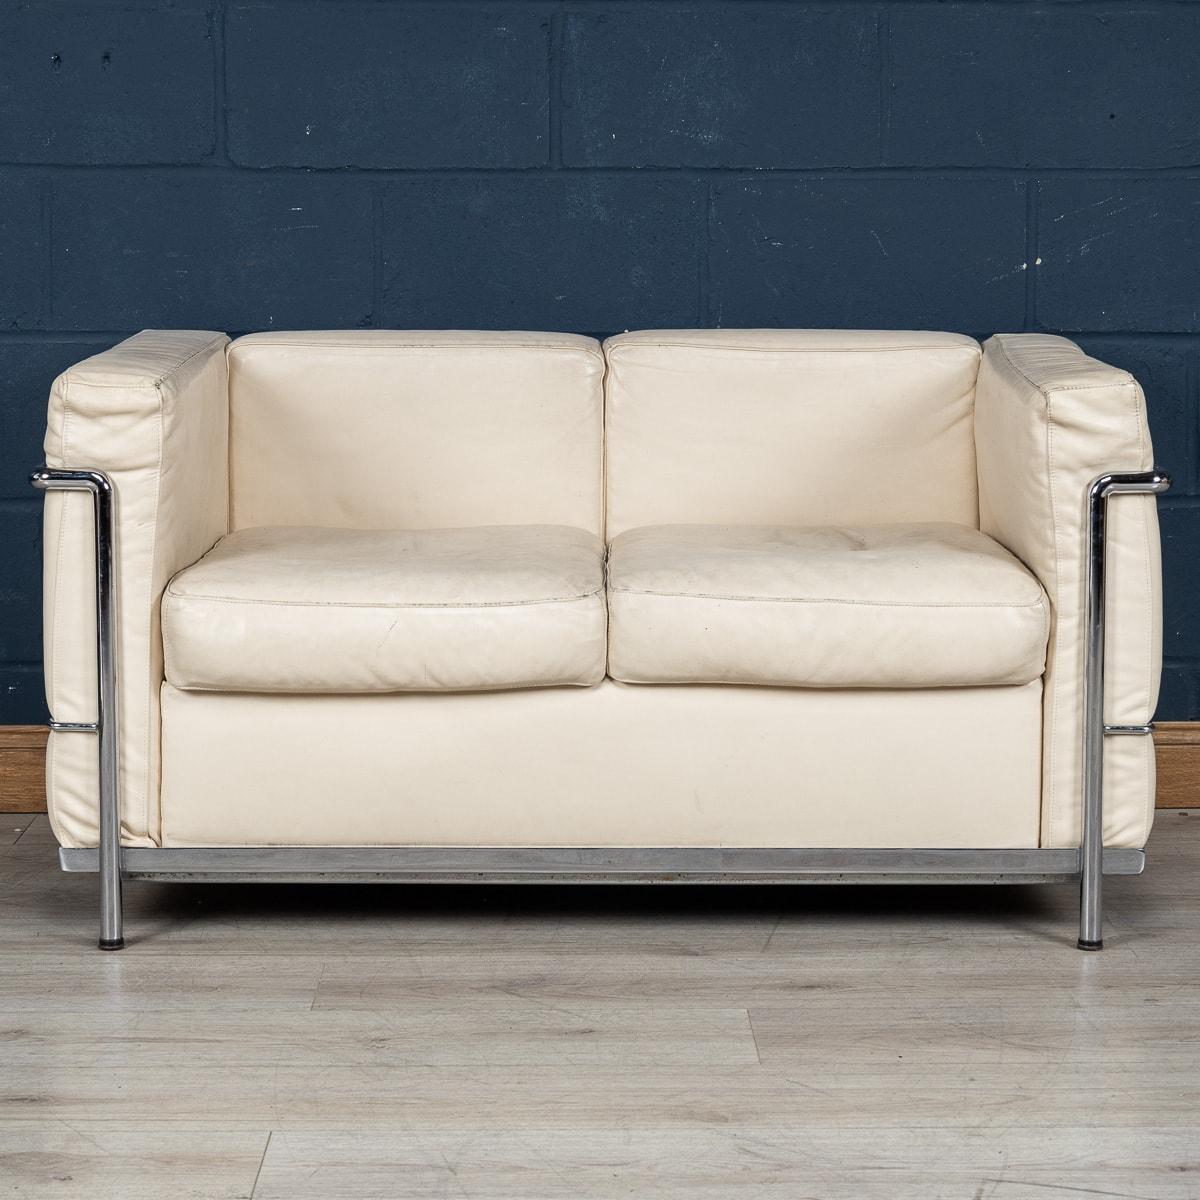 A white leather sofa in the manner of Le Corbusier’s LC2 sofa, crafted in Italy in the 1980s. It captures the essence of vintage aesthetics and offers the same iconic look as its counterparts. This sofa allows enthusiasts to enjoy the elegance and